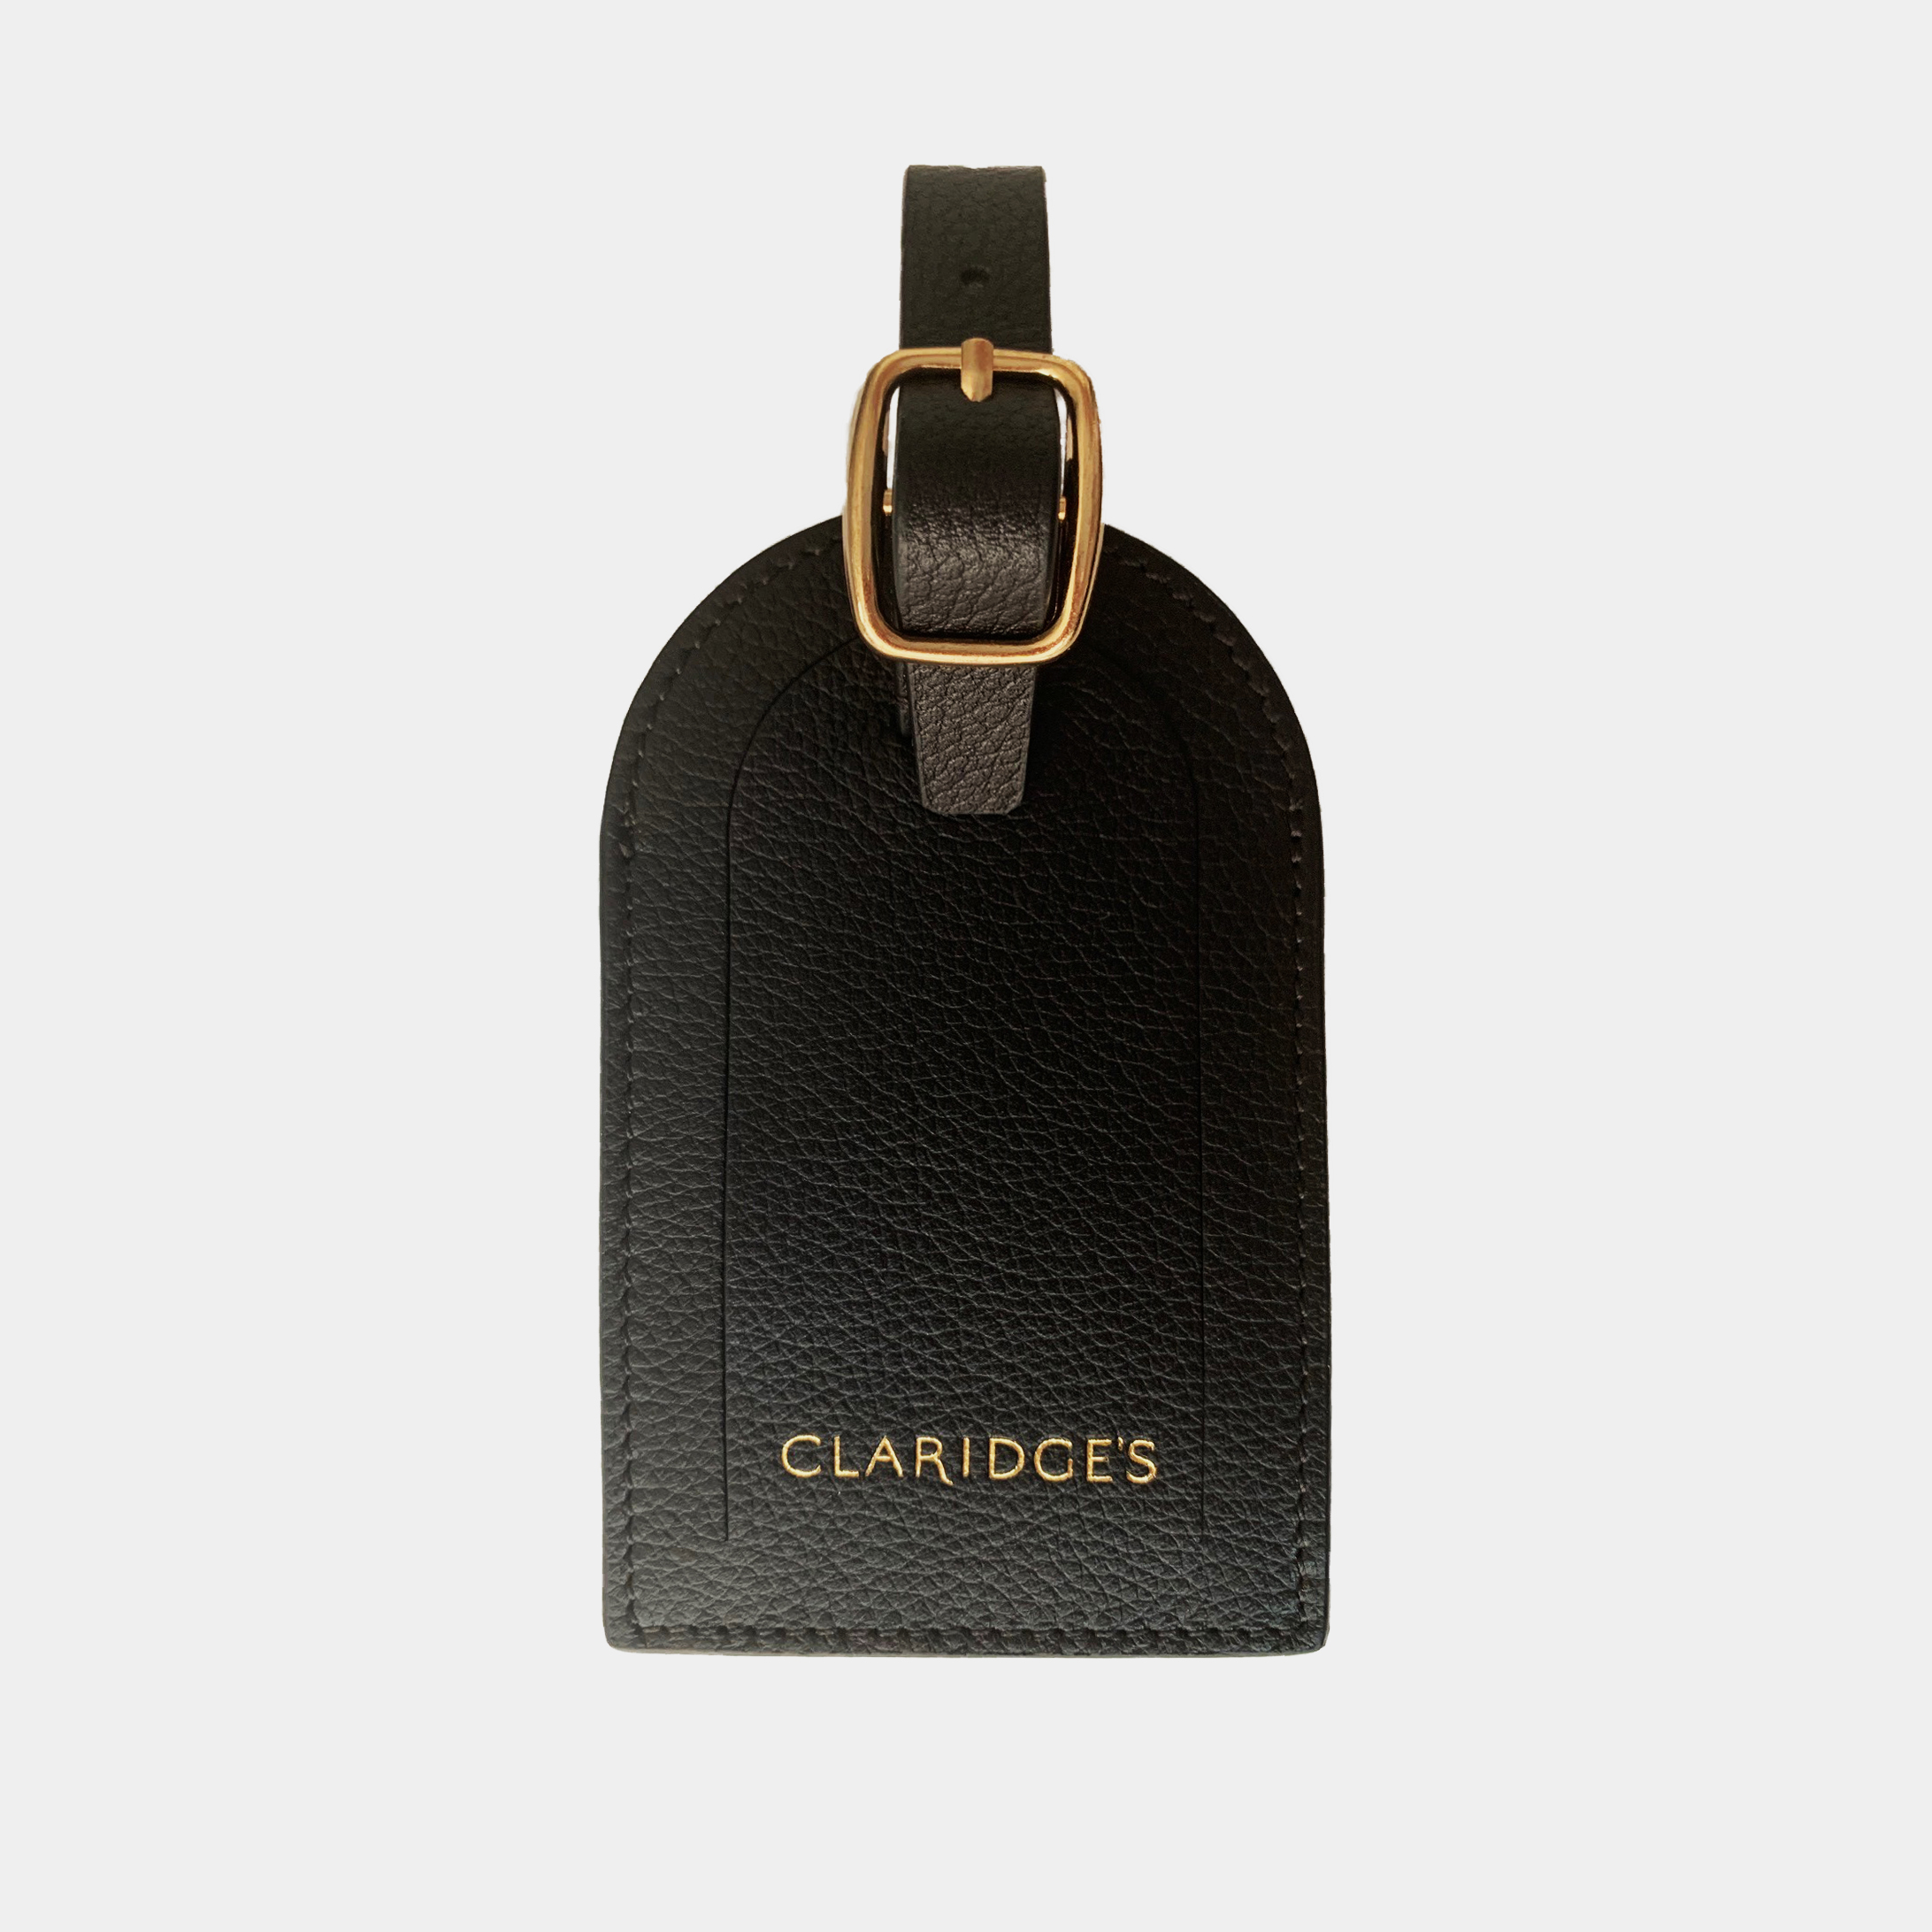 Classic luxury leather luggage tag, branded with your company logo for travel gifting